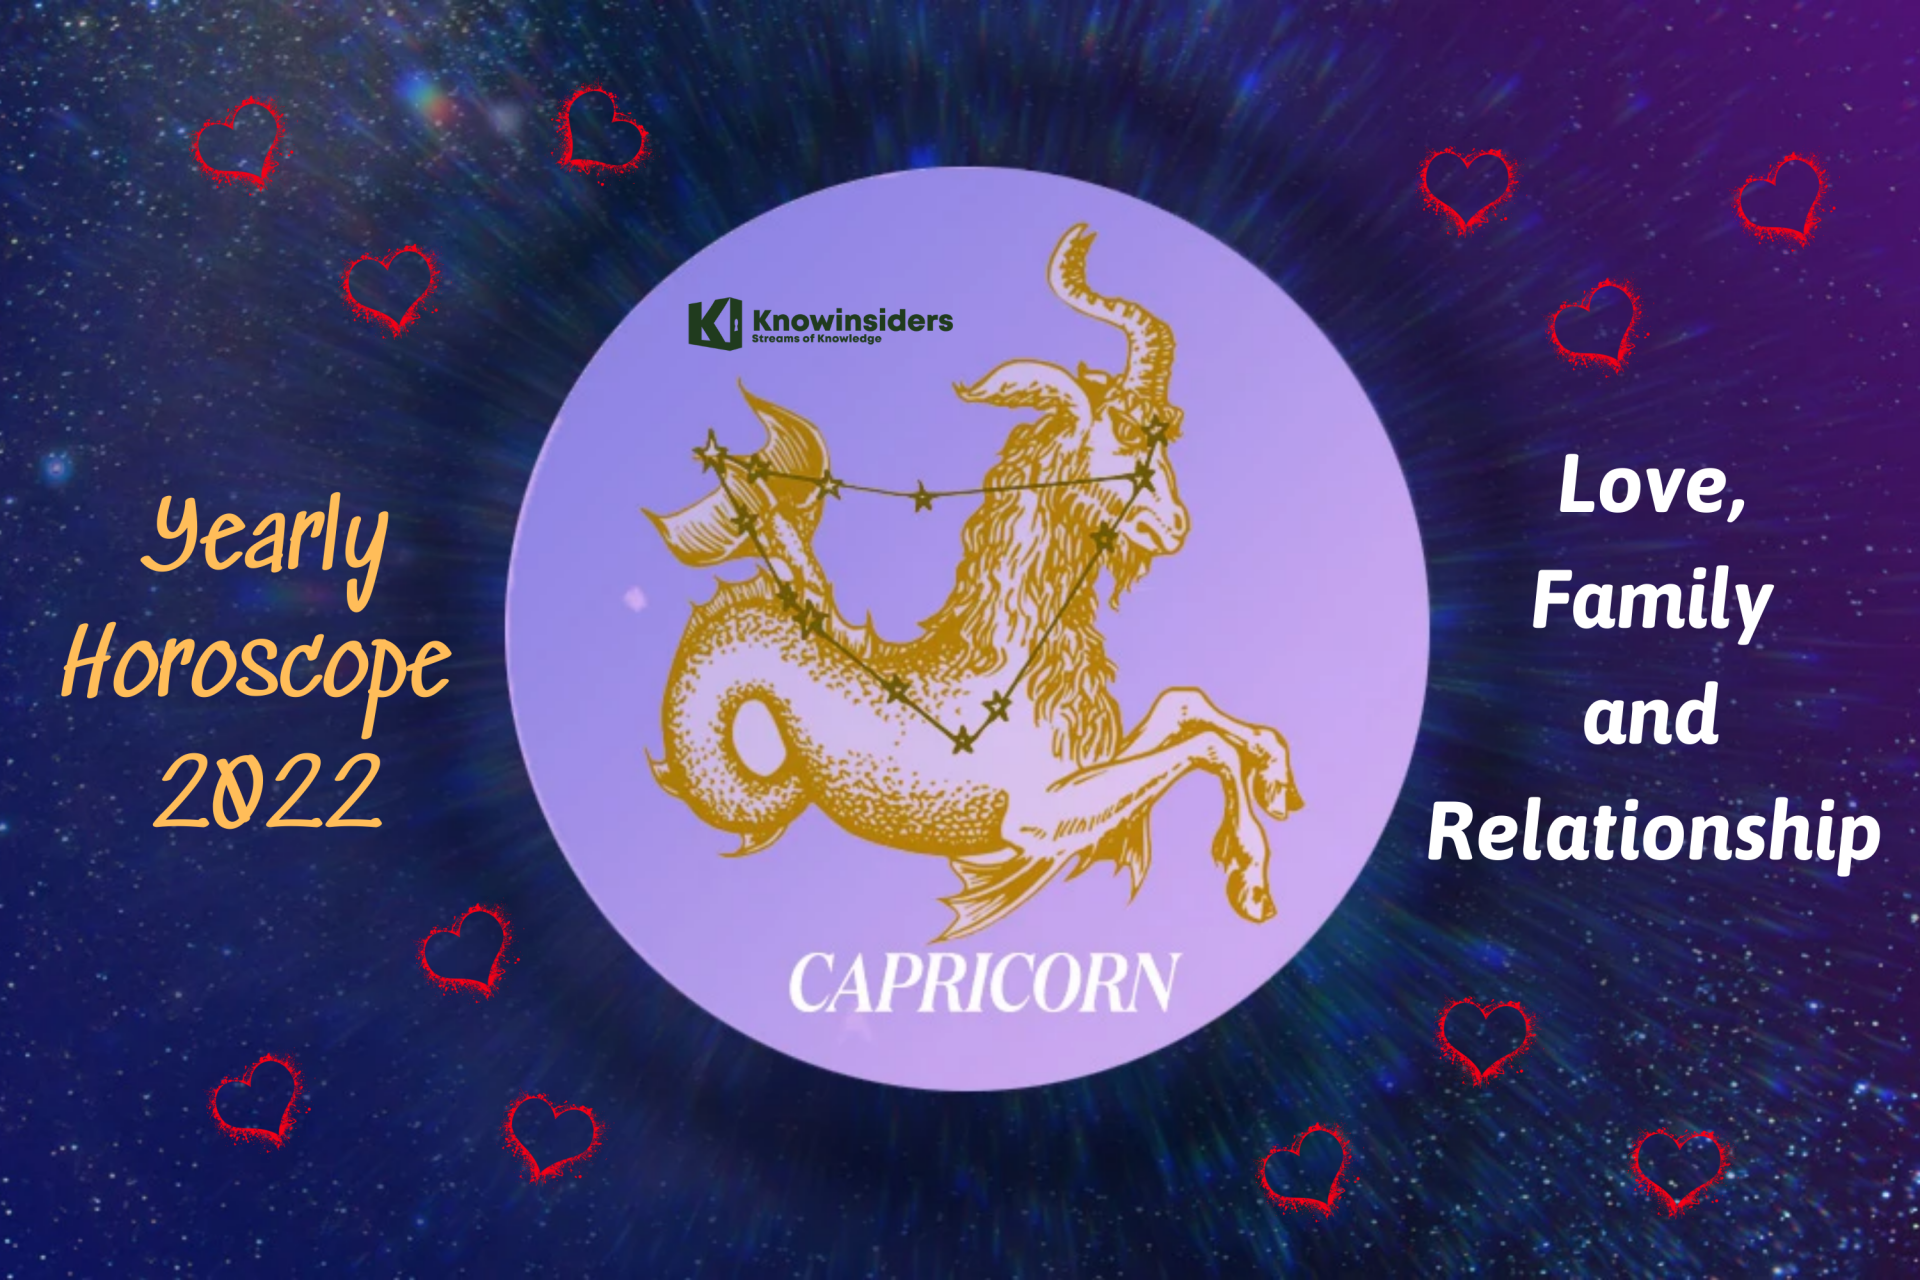 CAPRICORN Yearly Horoscope 2002: Predictions for Love, Family and Relationship